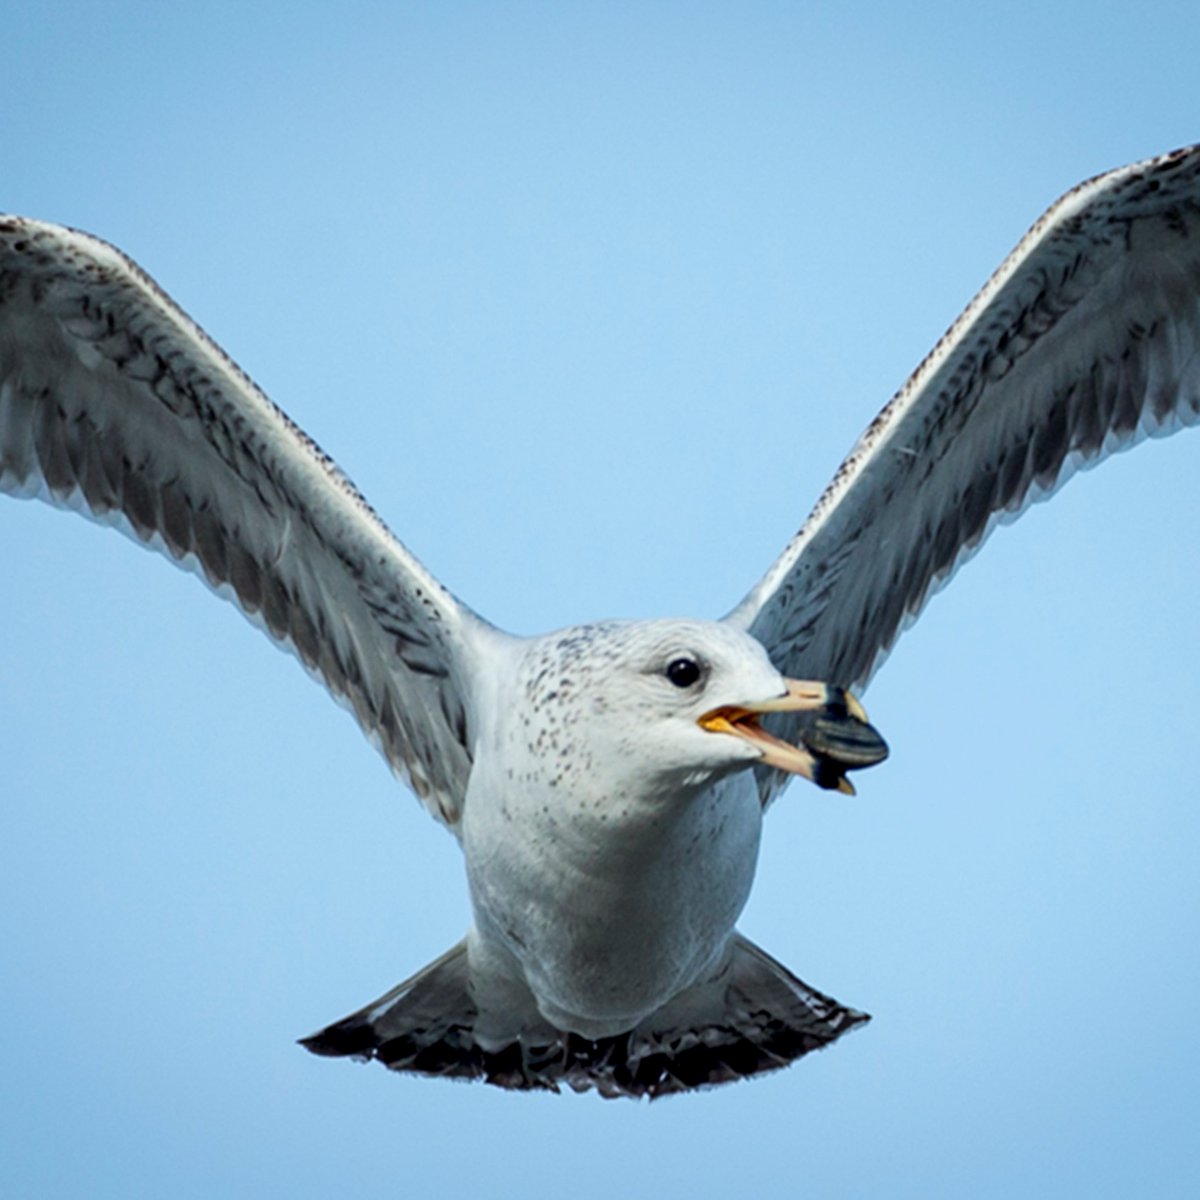 Can you identify this gull flying over Bolsa Chica? Gulls play an important scavenger role in the ecosystem and also serve as a prey item to larger bird species like hawks and falcons. See if you can identify the species of this gull before anyone else! PC: Jim Akers